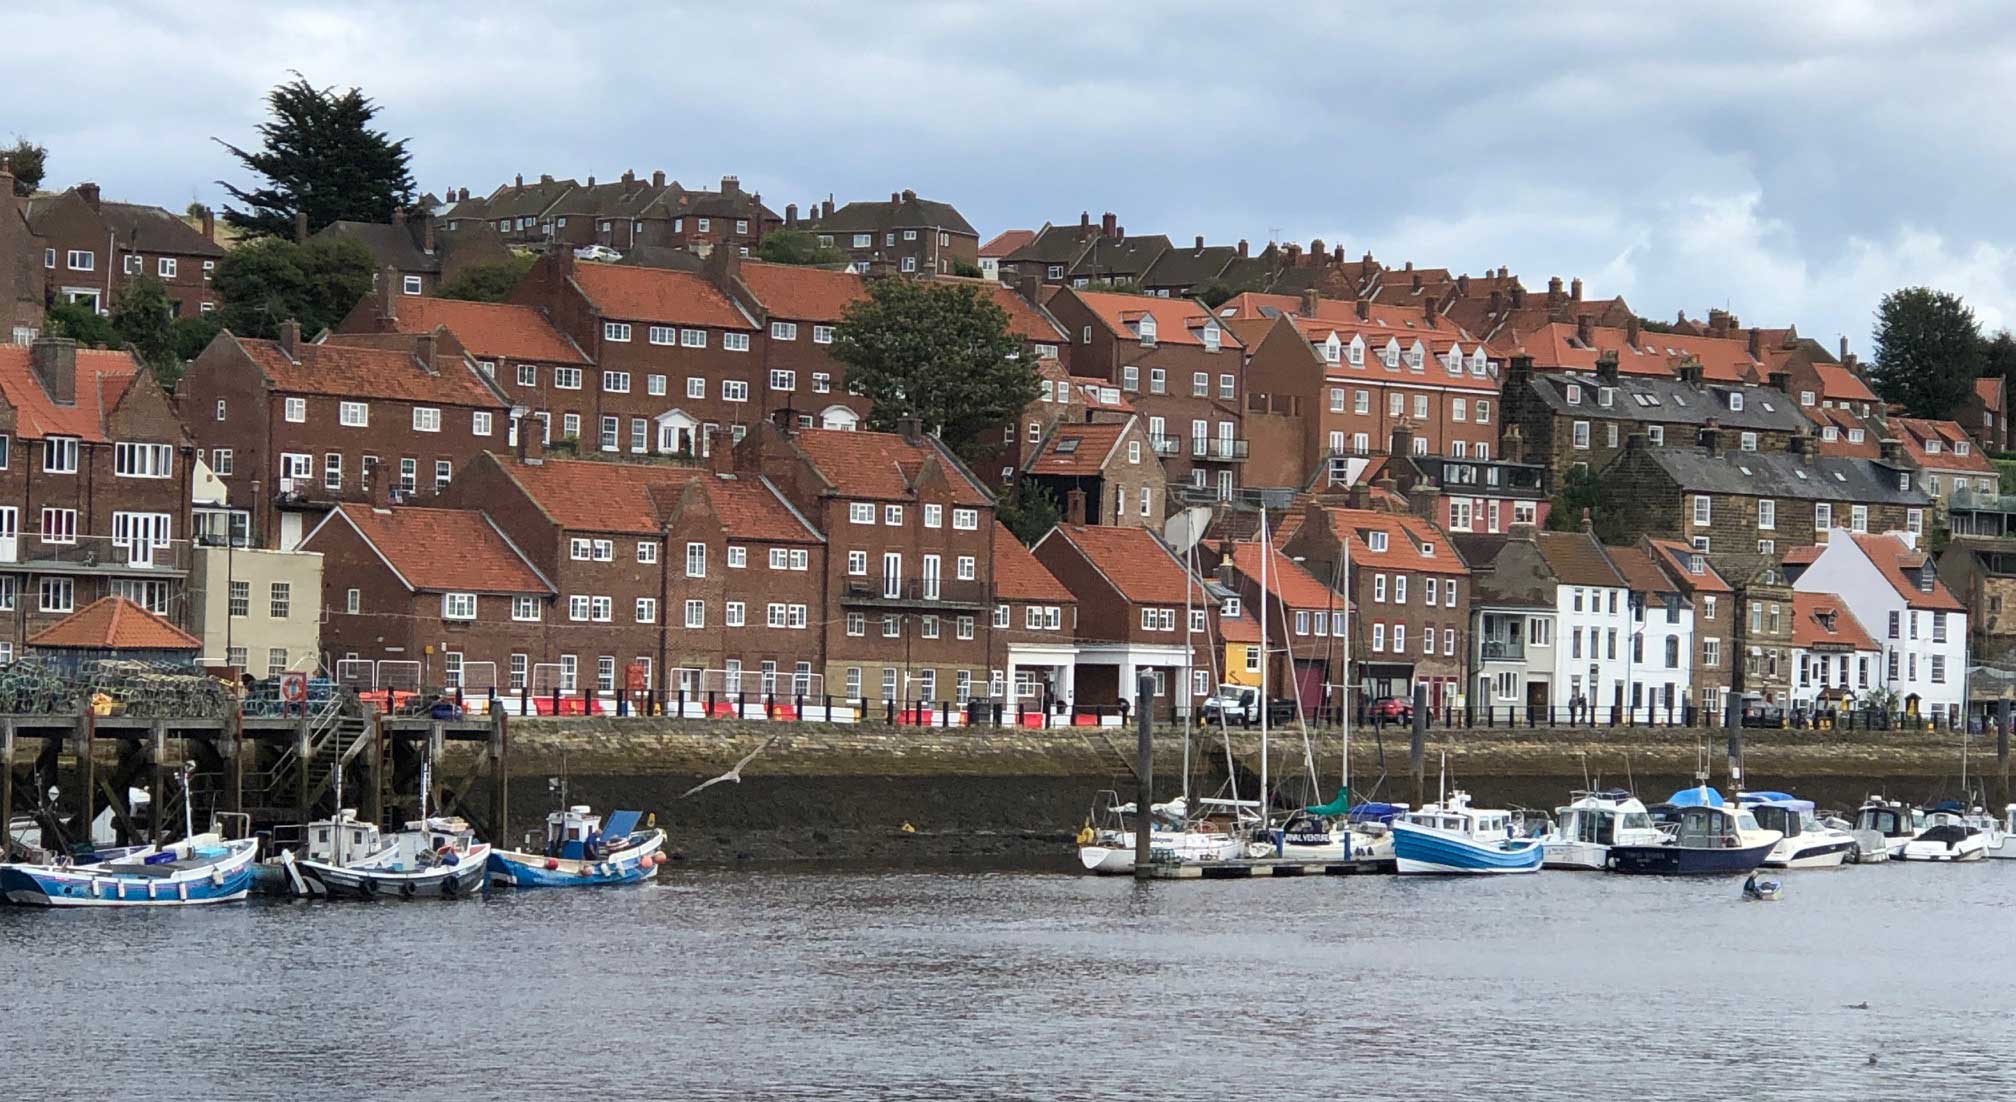 This still thriving village on the sea coast of England was built centuries ago. Photo: Morf Morford